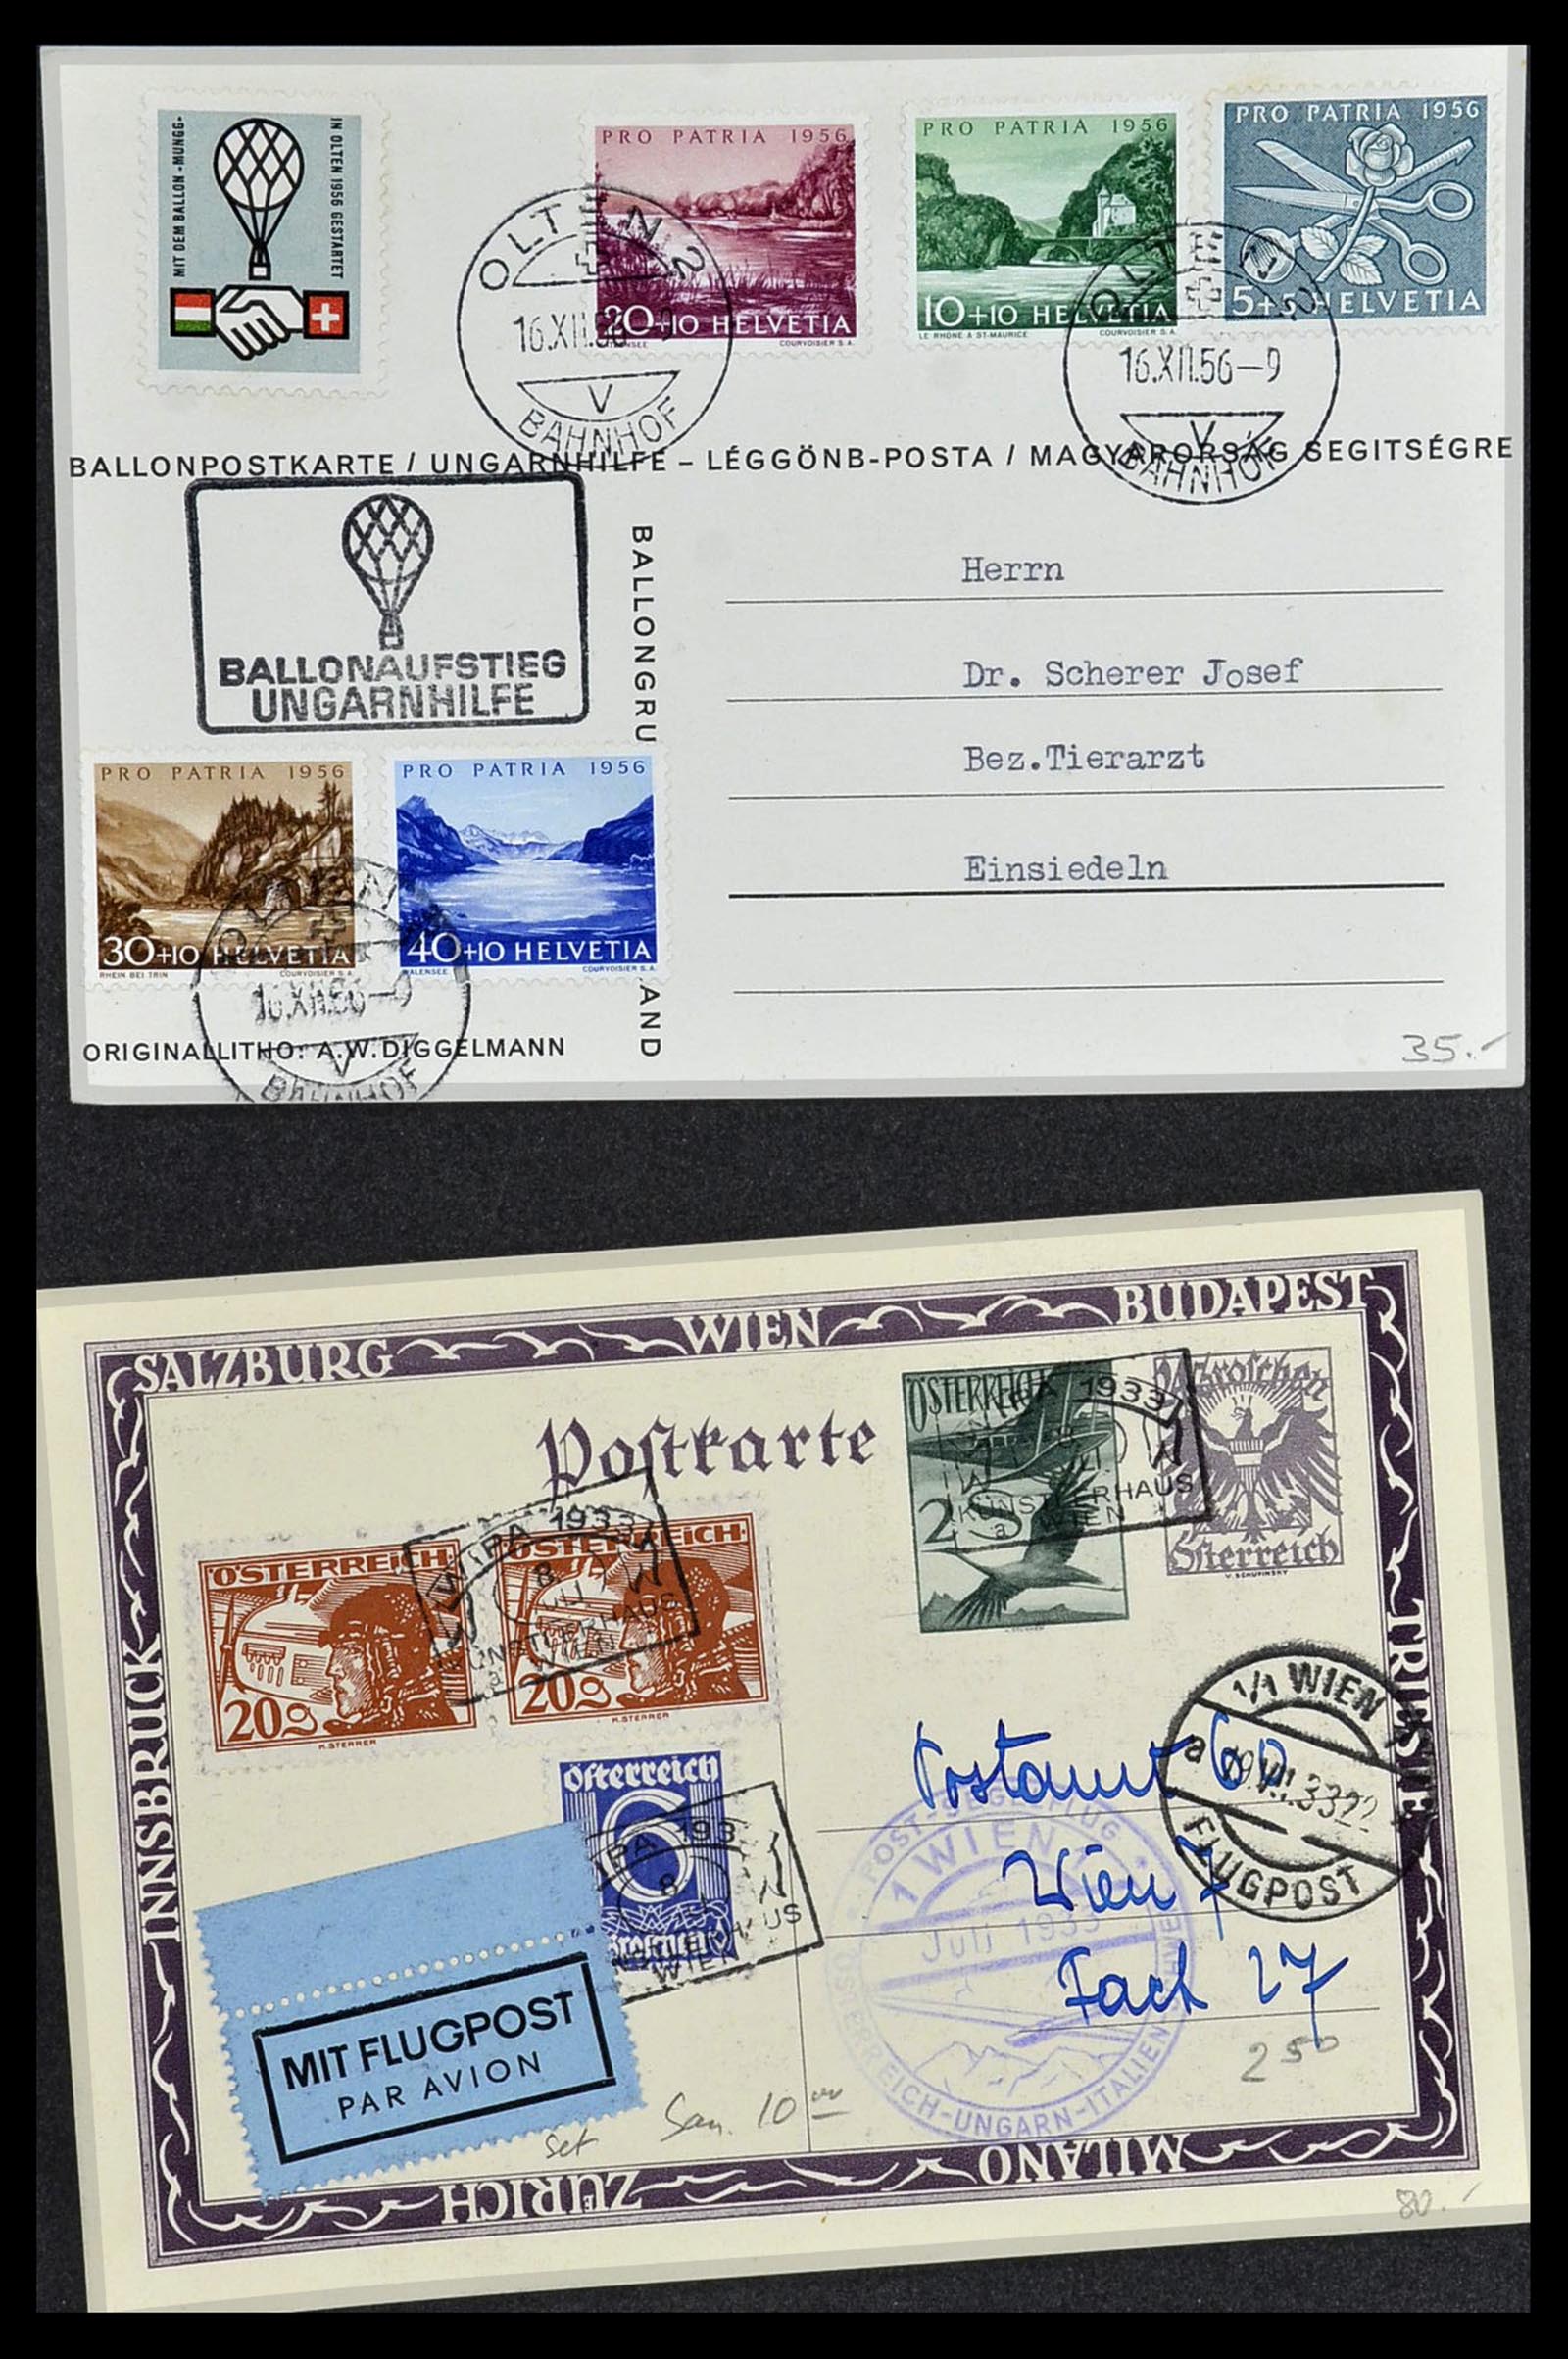 34141 064 - Stamp collection 34141 Switzerland airmail covers 1920-1960.